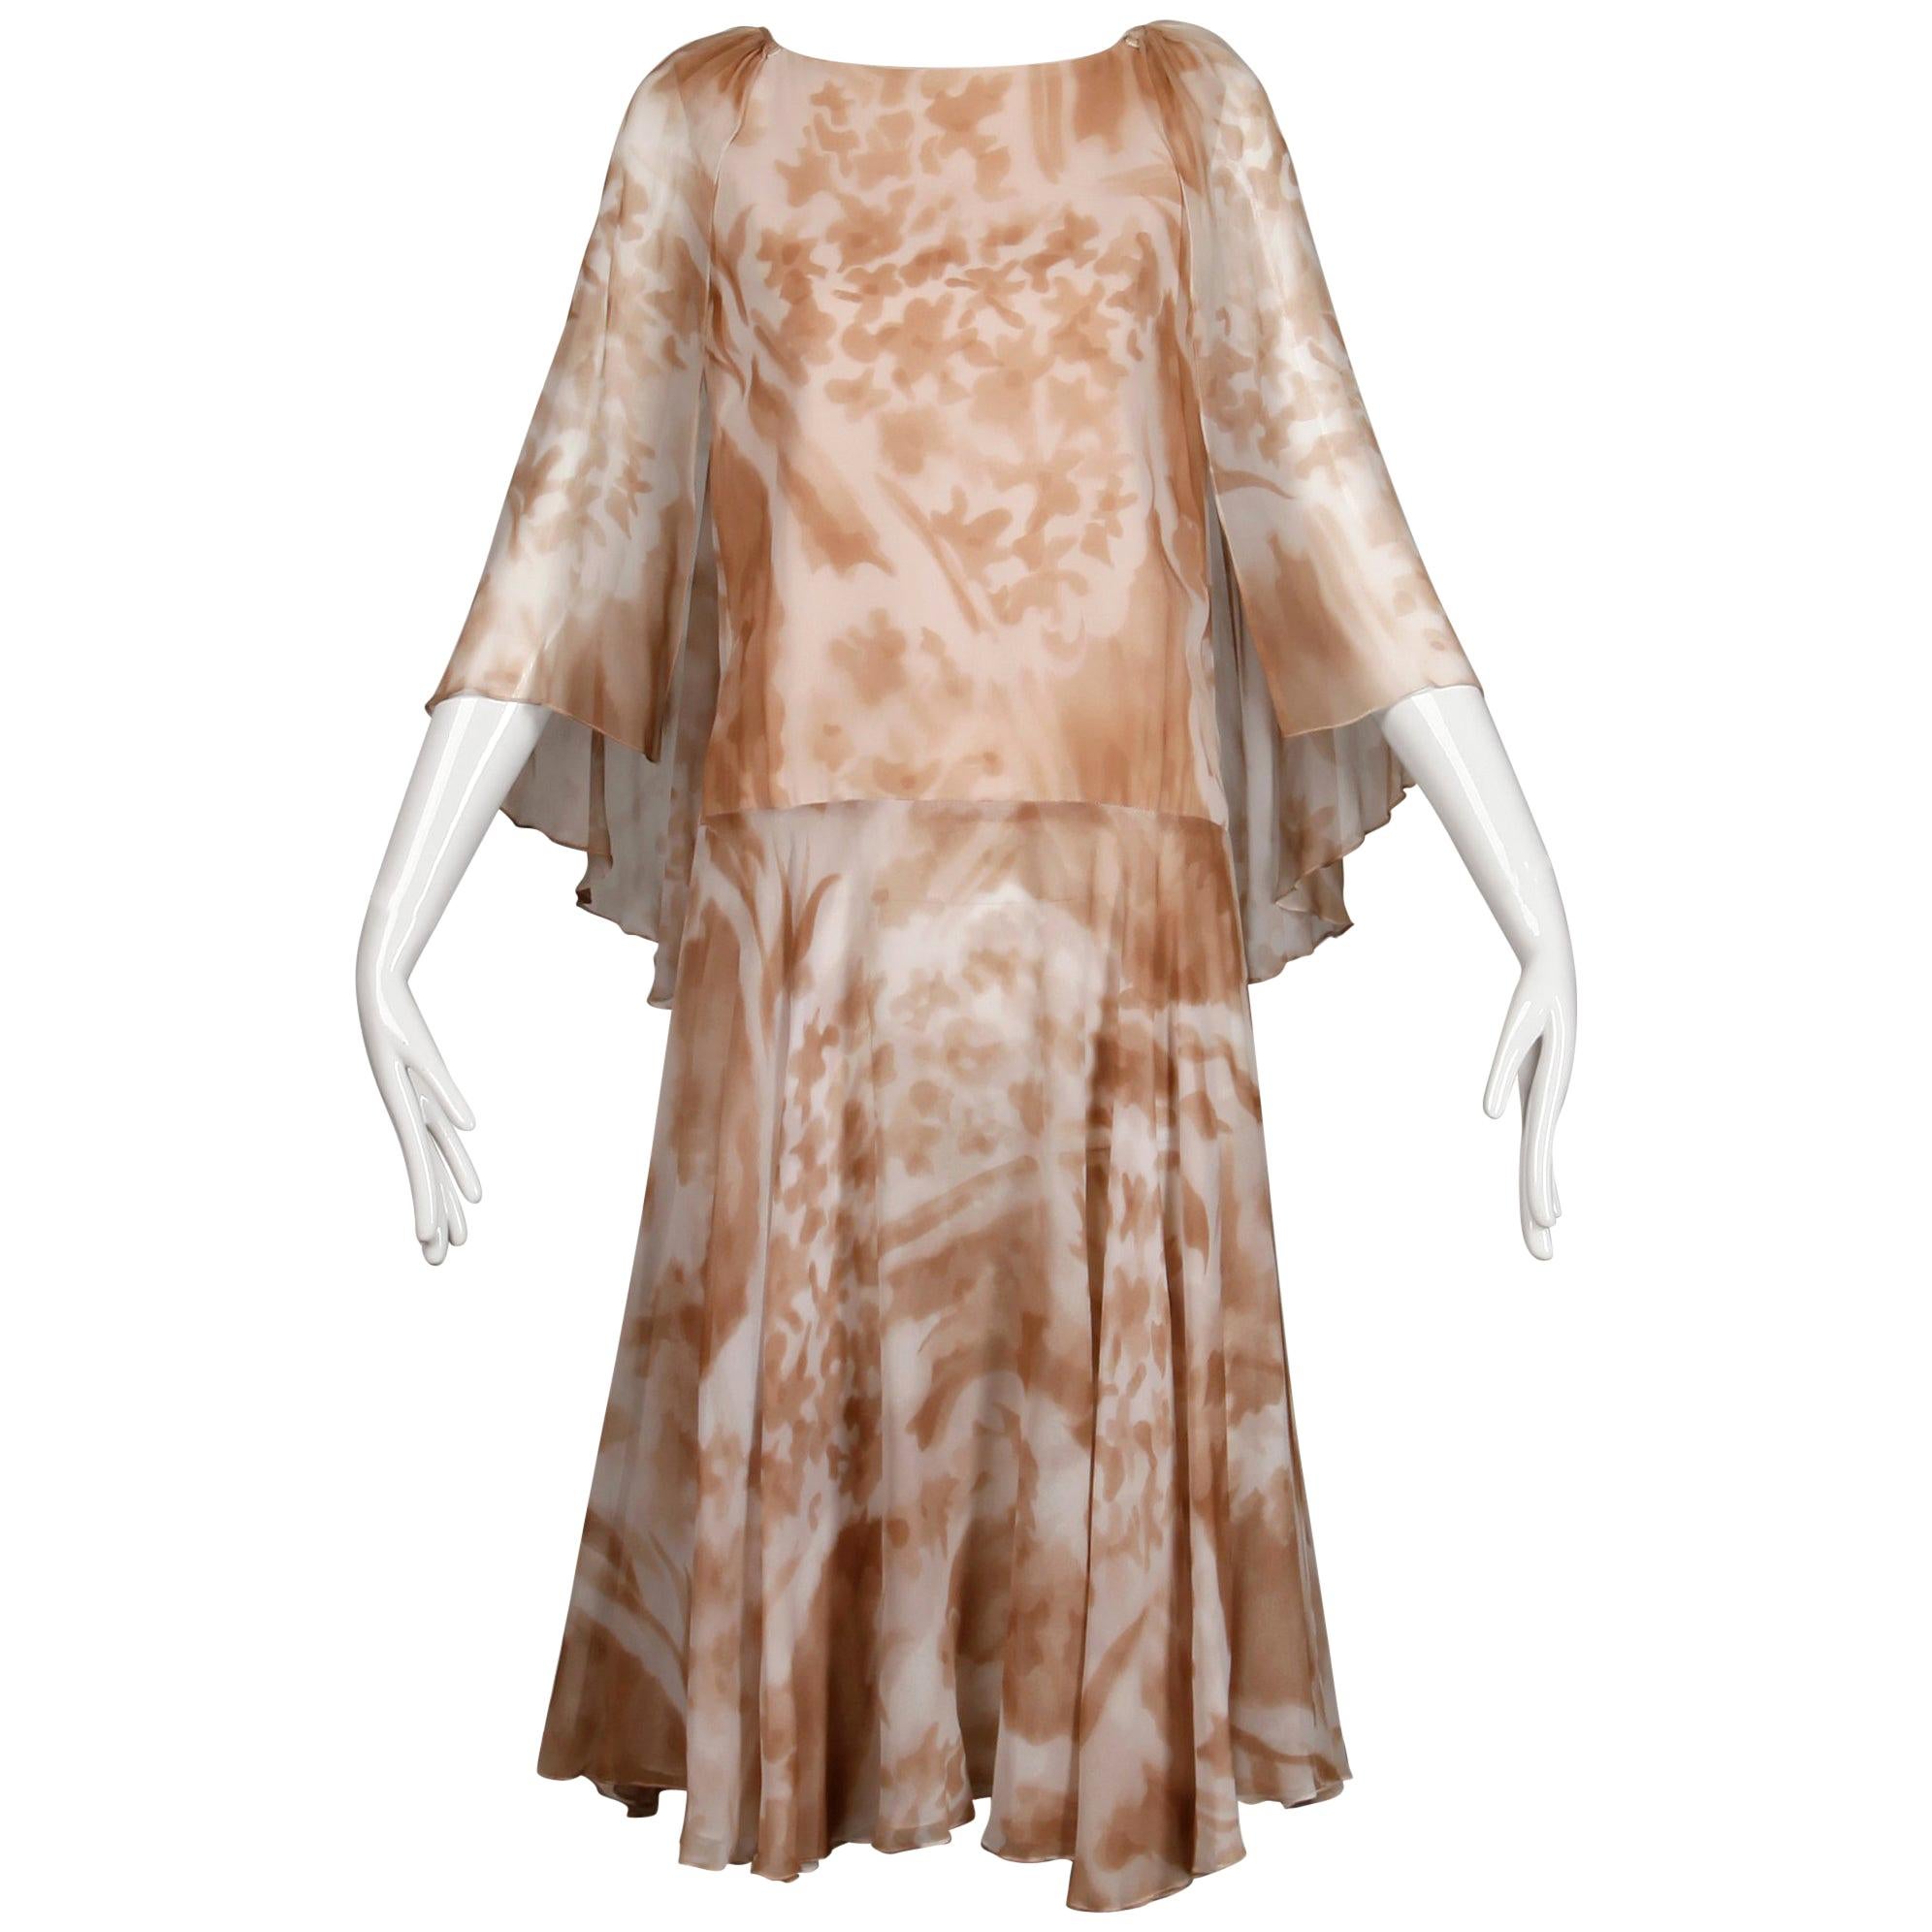 1970s Mr. Blackwell Vintage Sheer Silk Chiffon Print Dress with Detachable Cape For Sale